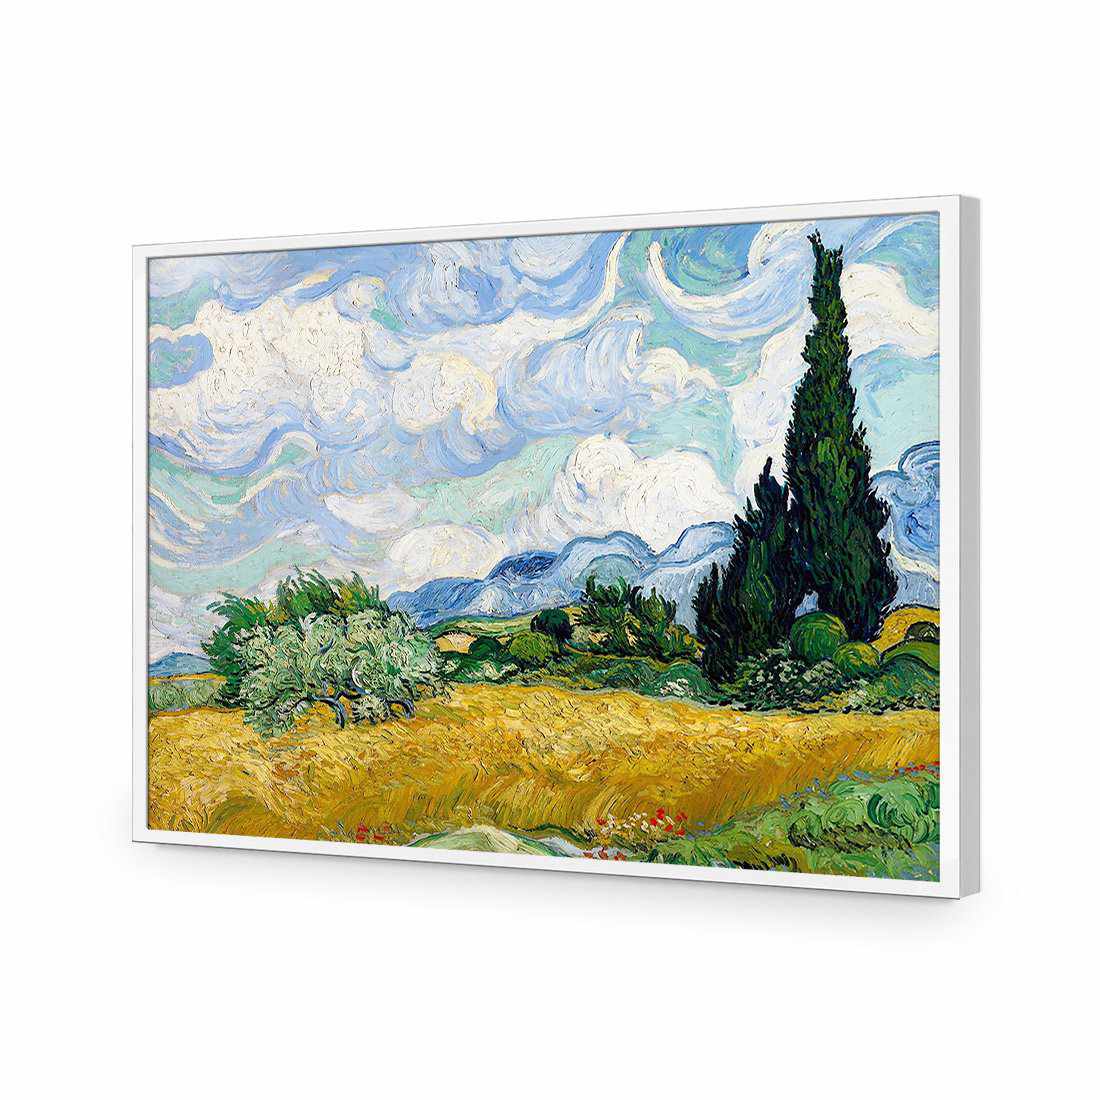 Wheat Field With Cypresses - Van Gogh-Acrylic-Wall Art Design-Without Border-Acrylic - White Frame-45x30cm-Wall Art Designs